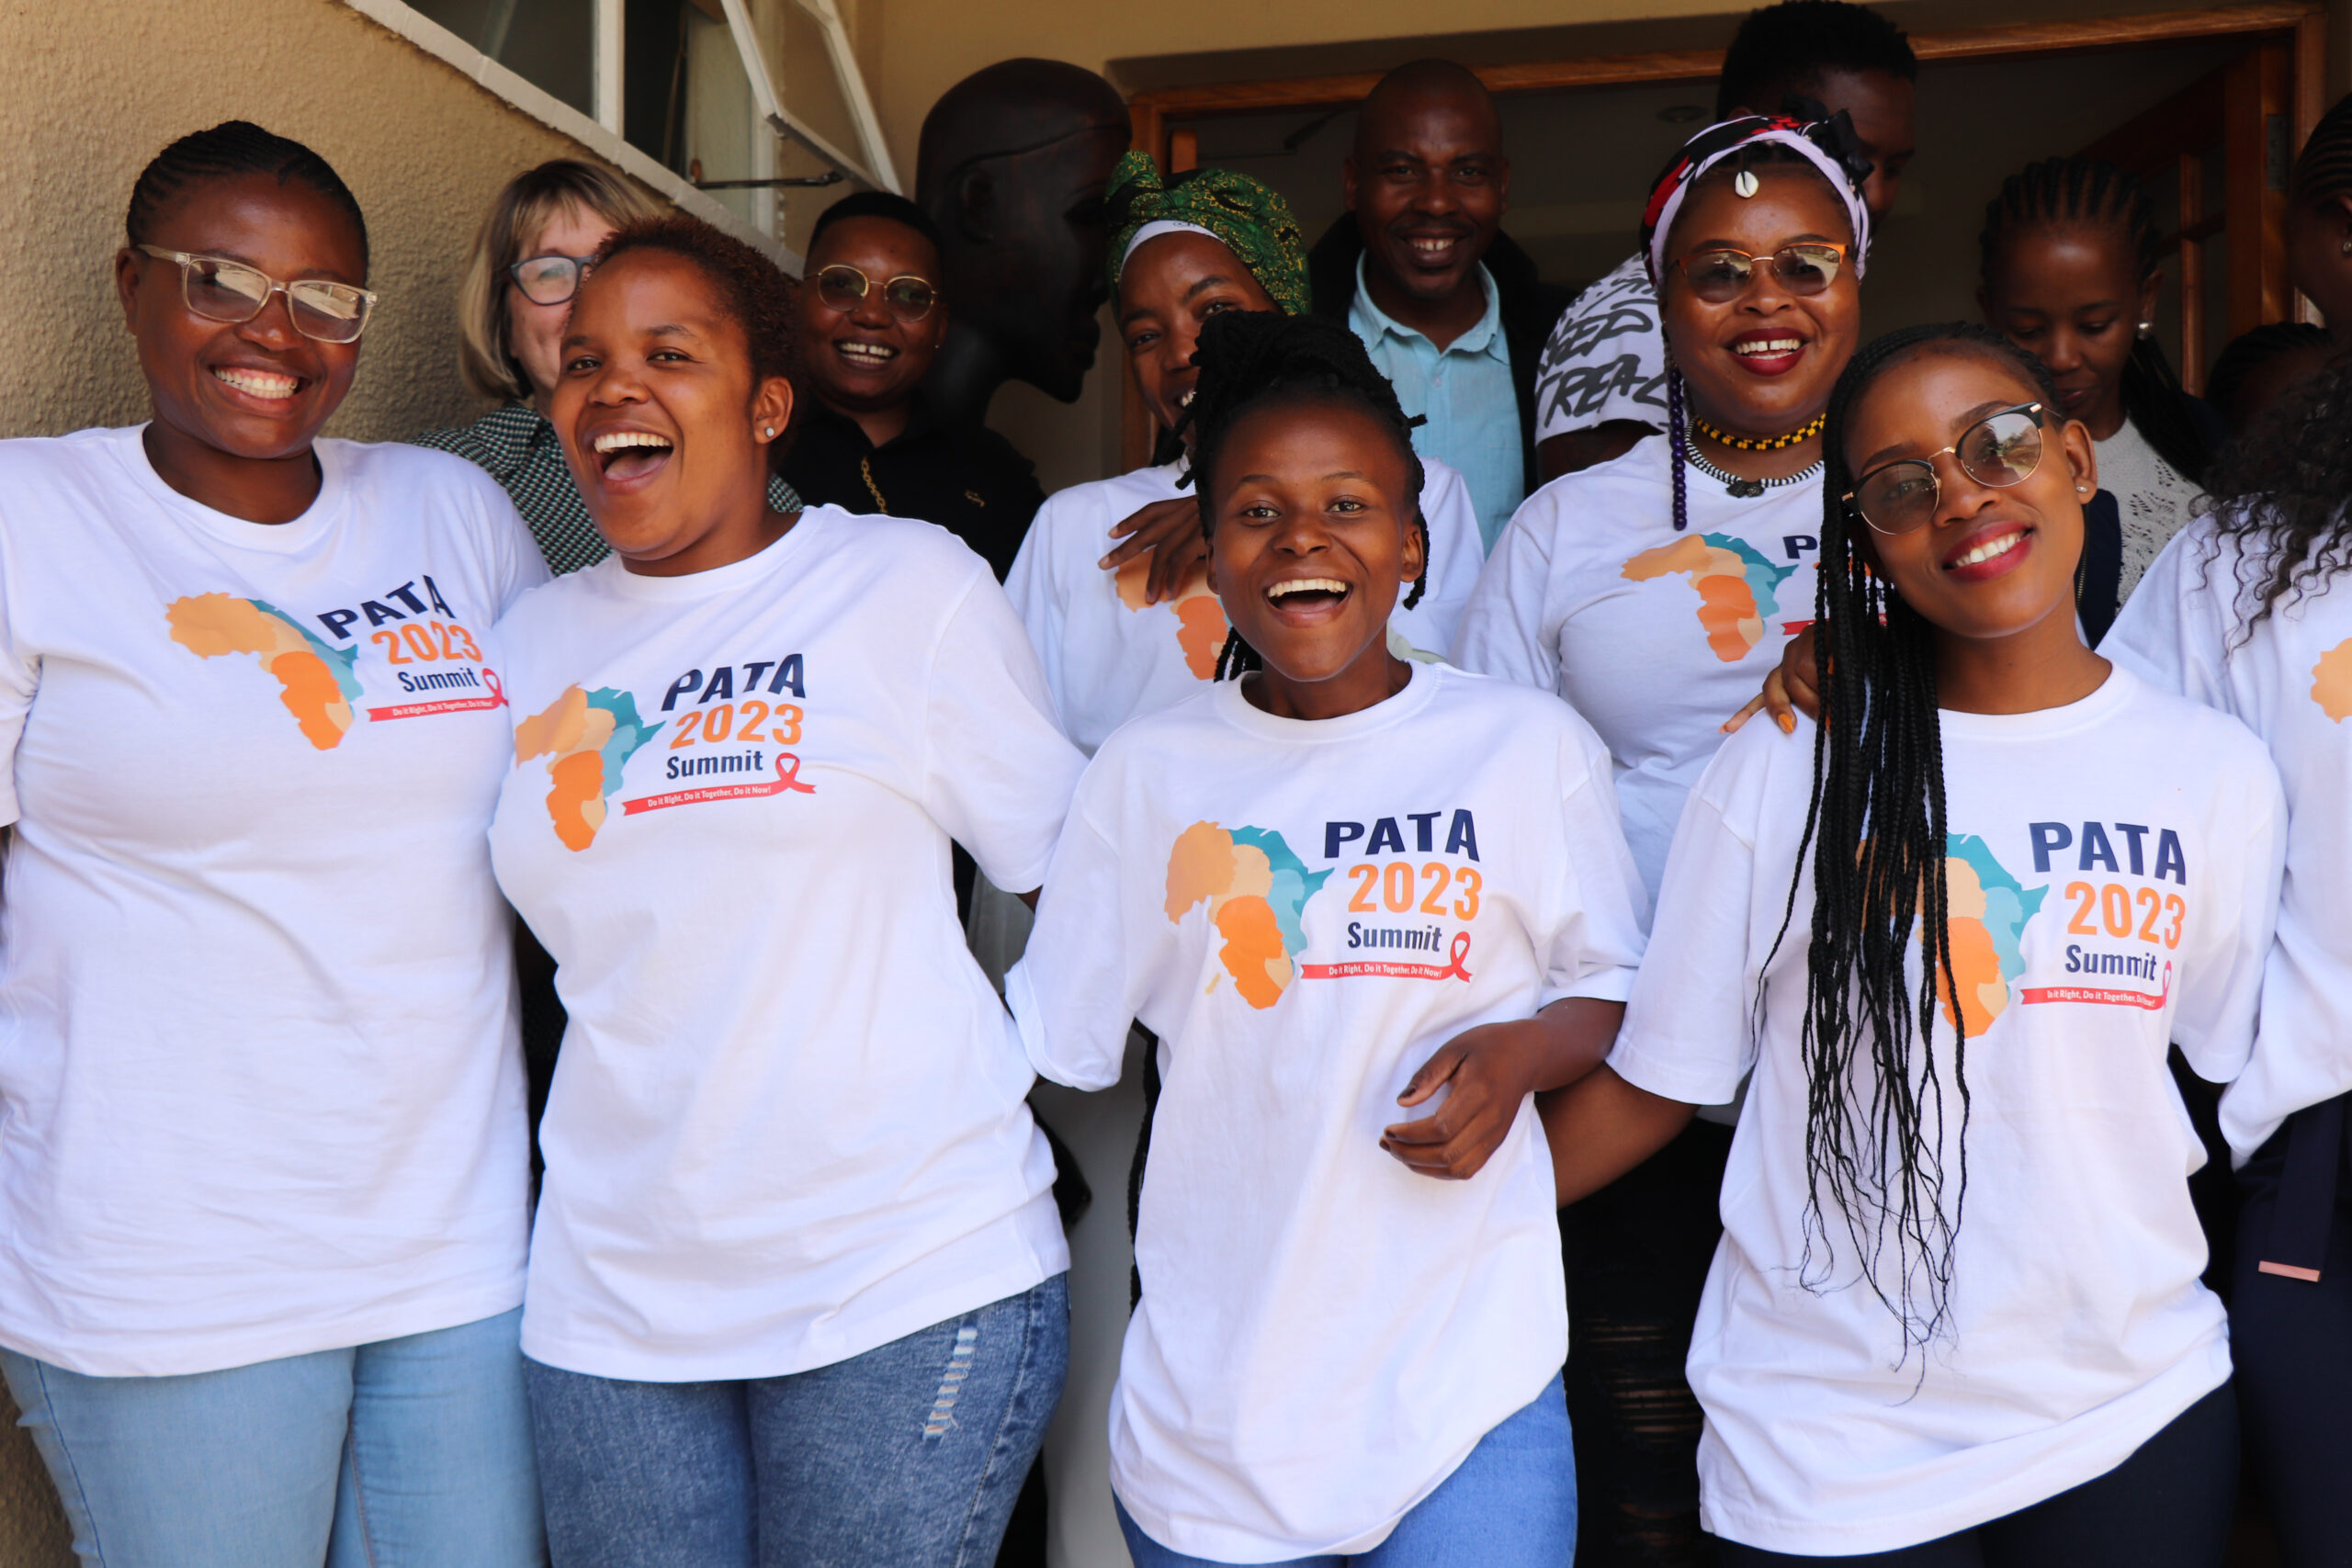 Participants at the PATA conference